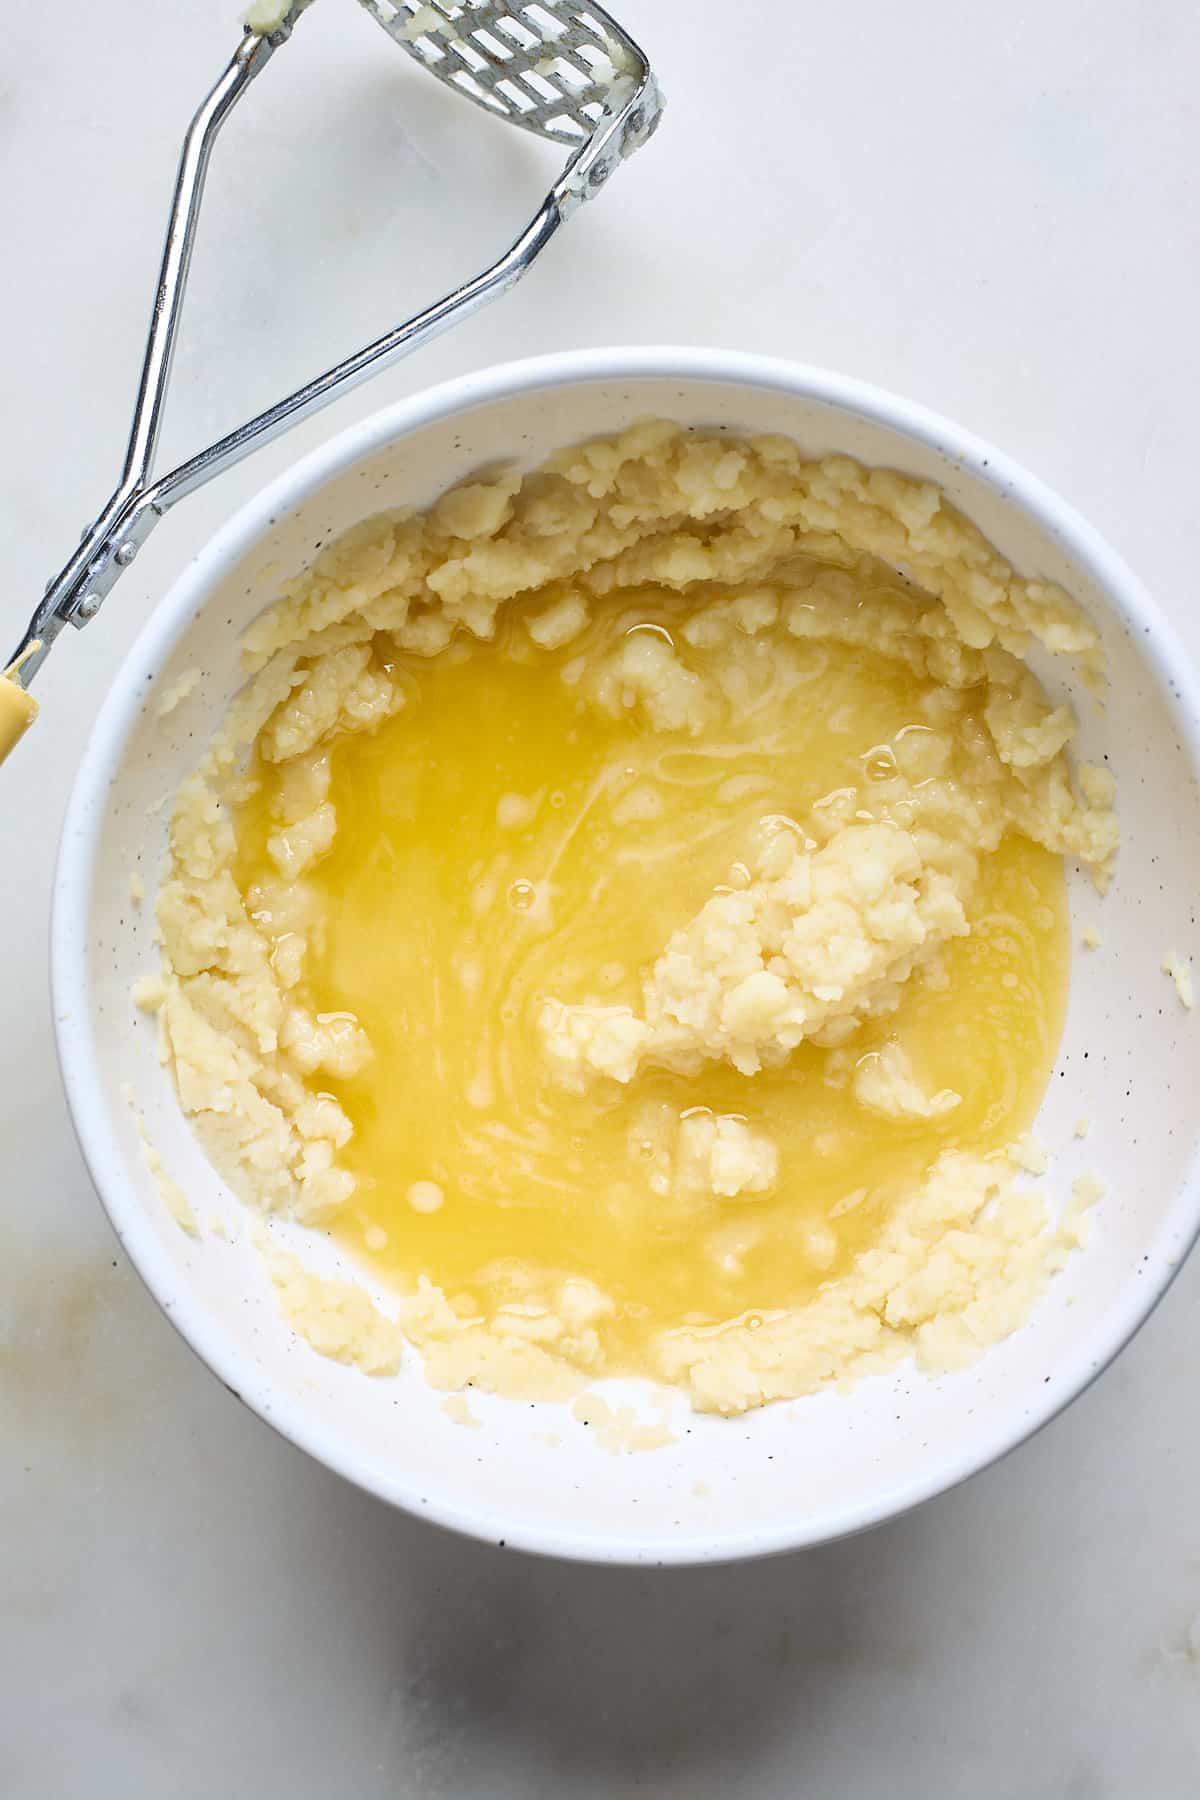 Mashed potatoes and melted butter in a large white bowl